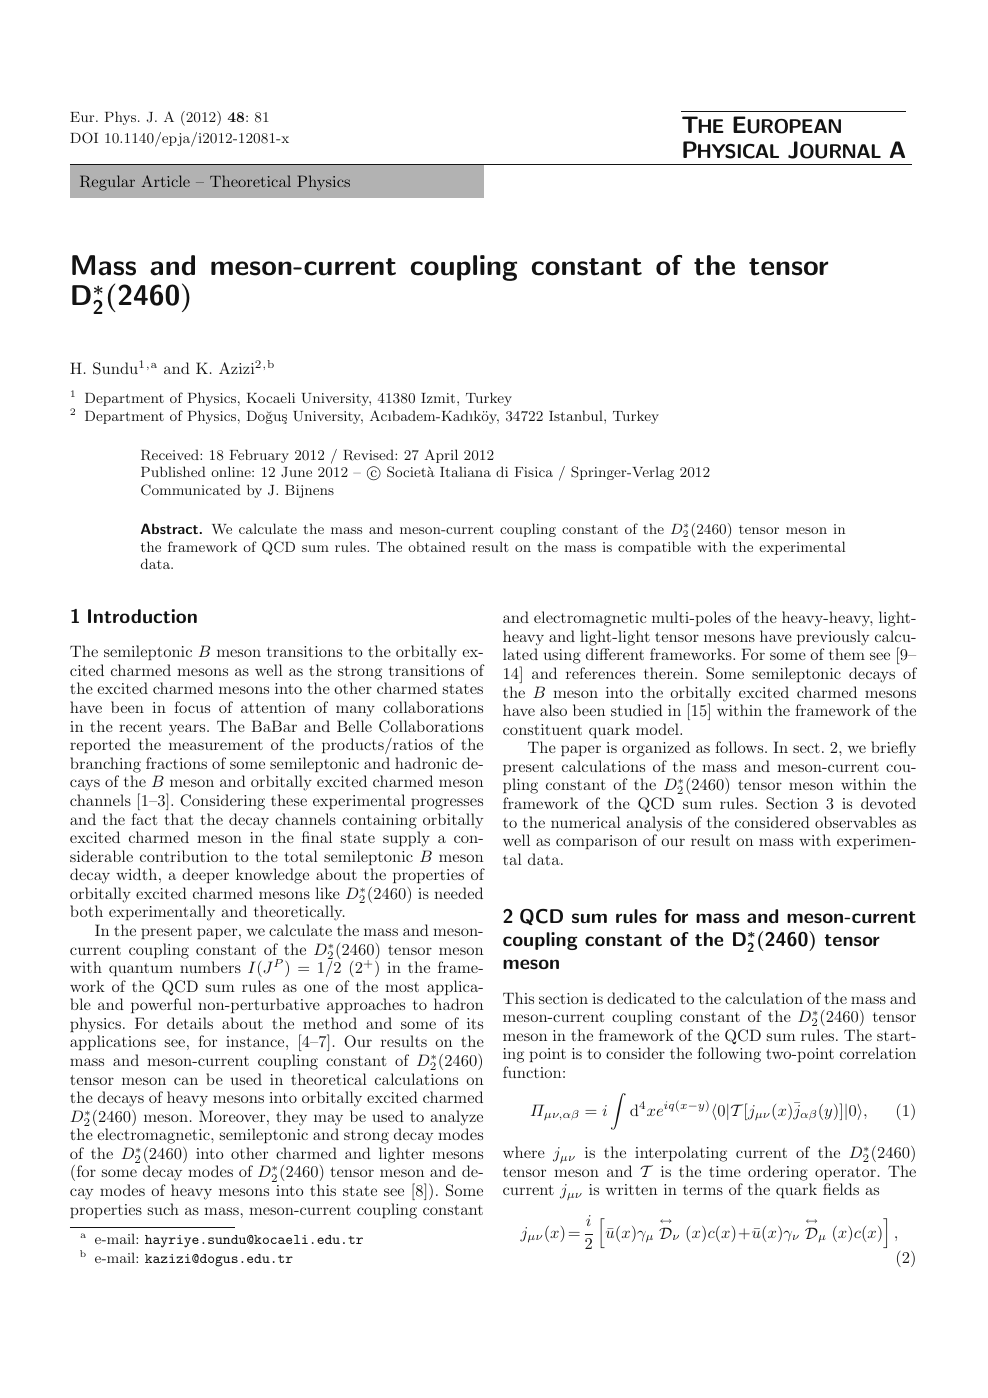 Mass And Meson Current Coupling Constant Of The Tensor D 2 2460 Topic Of Research Paper In Physical Sciences Download Scholarly Article Pdf And Read For Free On Cyberleninka Open Science Hub